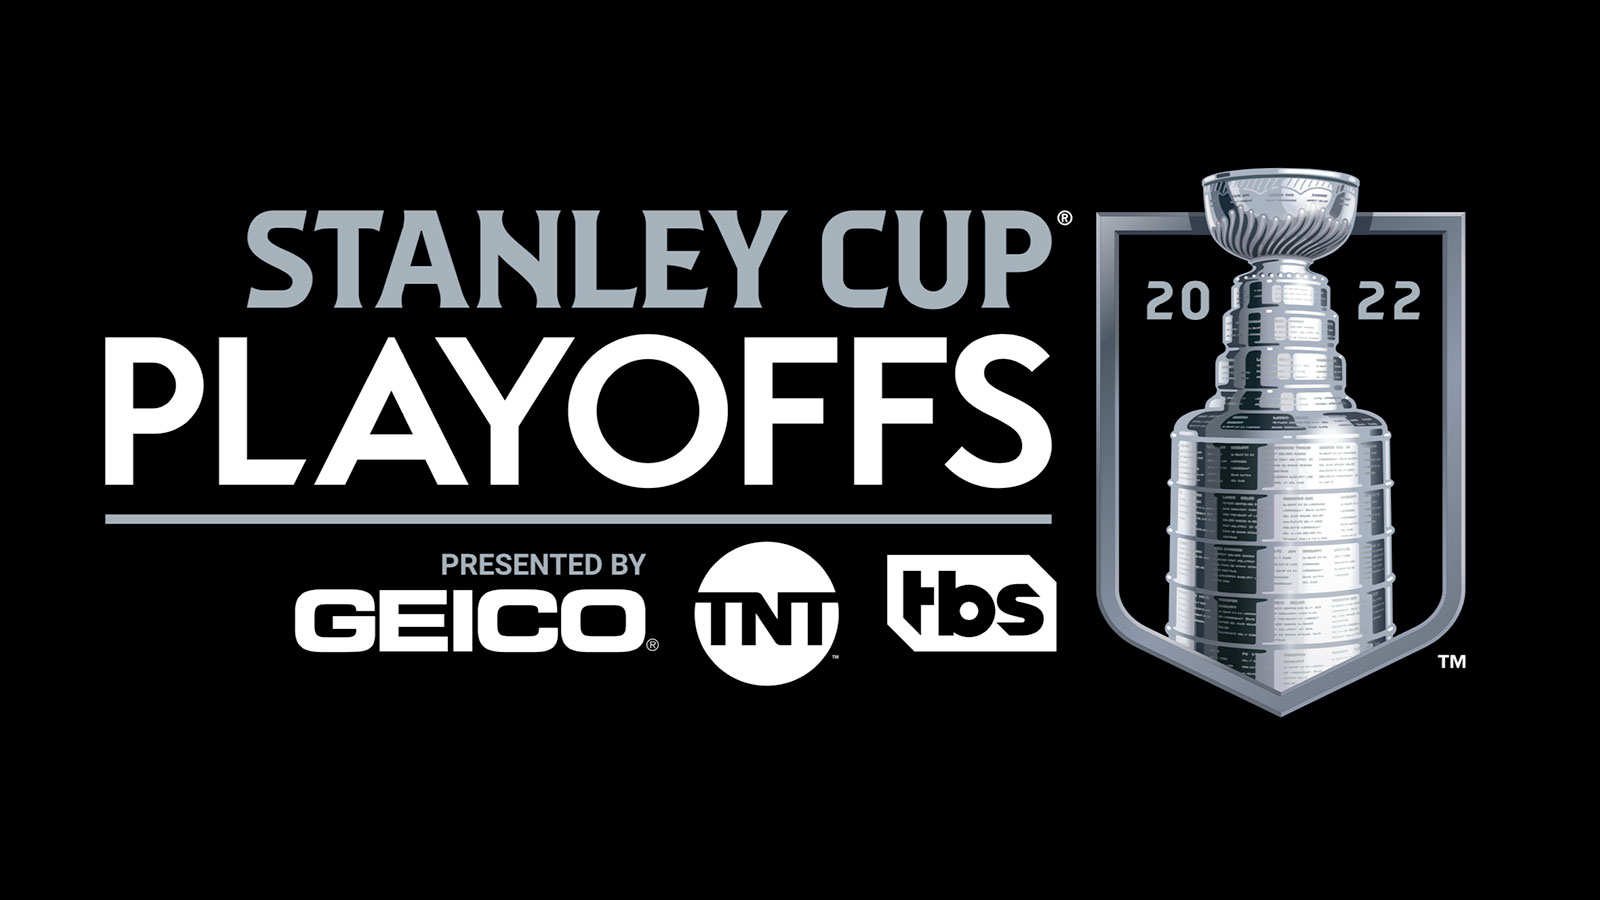 Turner Sports Exclusive Coverage of the 2022 Stanley Cup Playoff Western Conference Finals Presented by GEICO